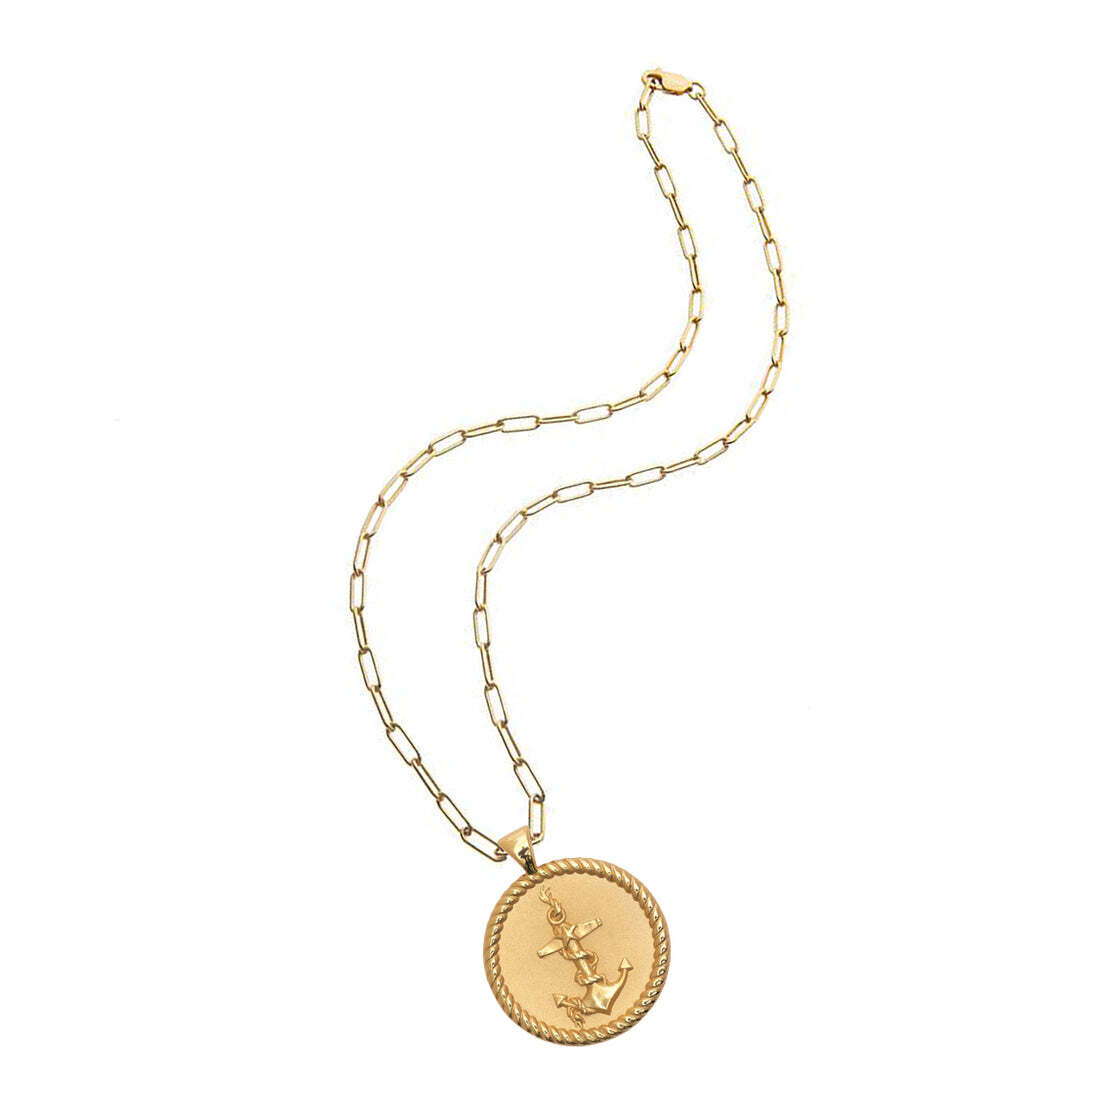 Jane Win Original STRONG Anchor Coin Pendant with Drawn Link Chain